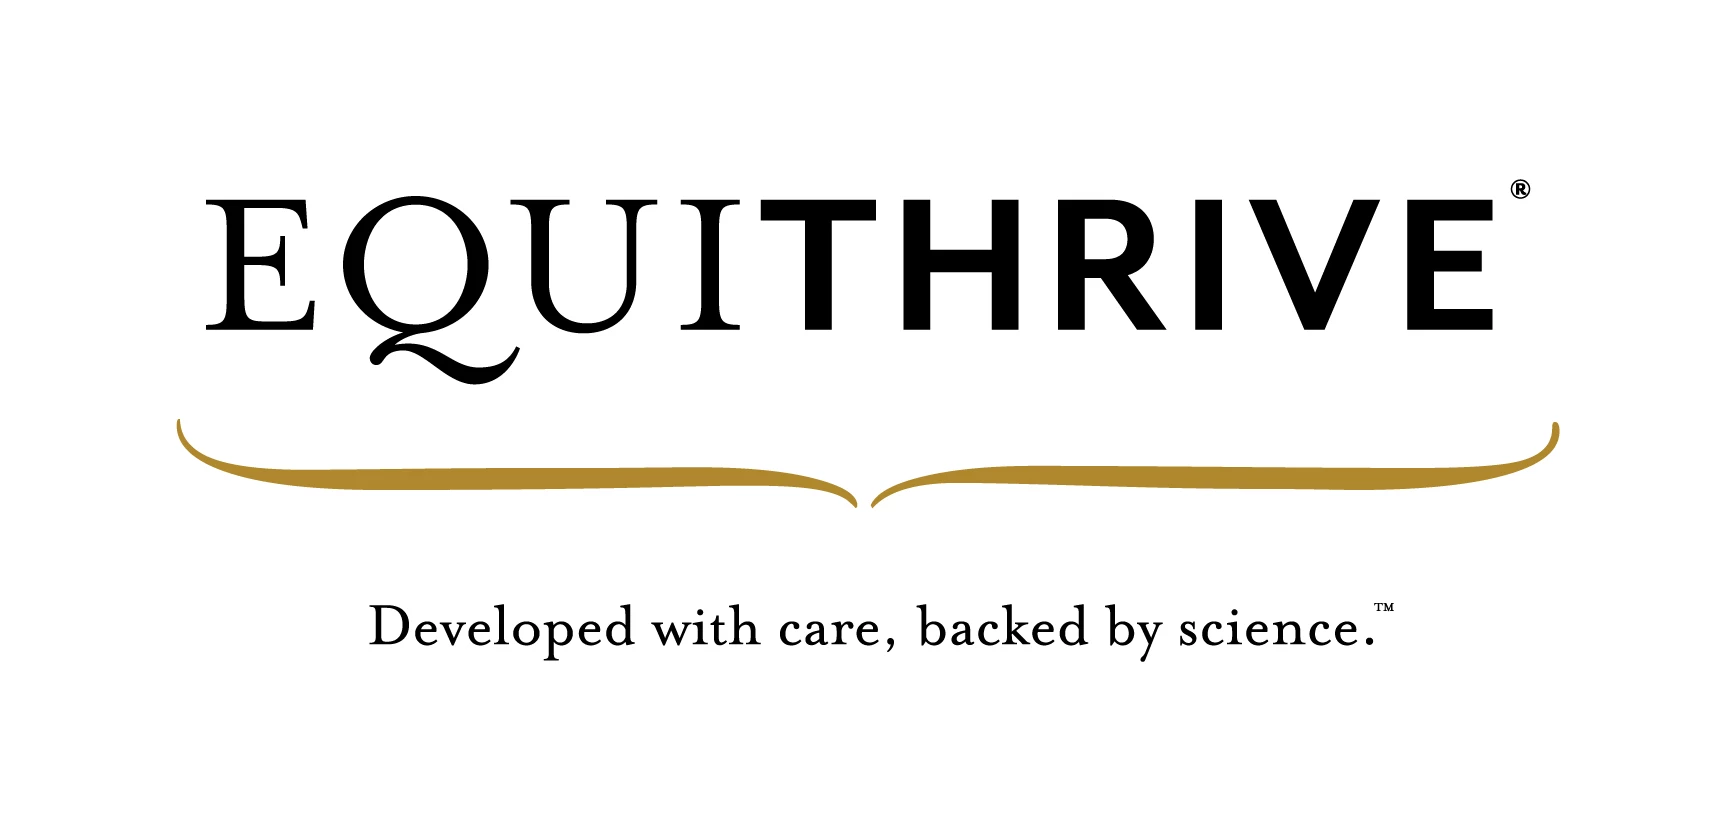 Equithrive